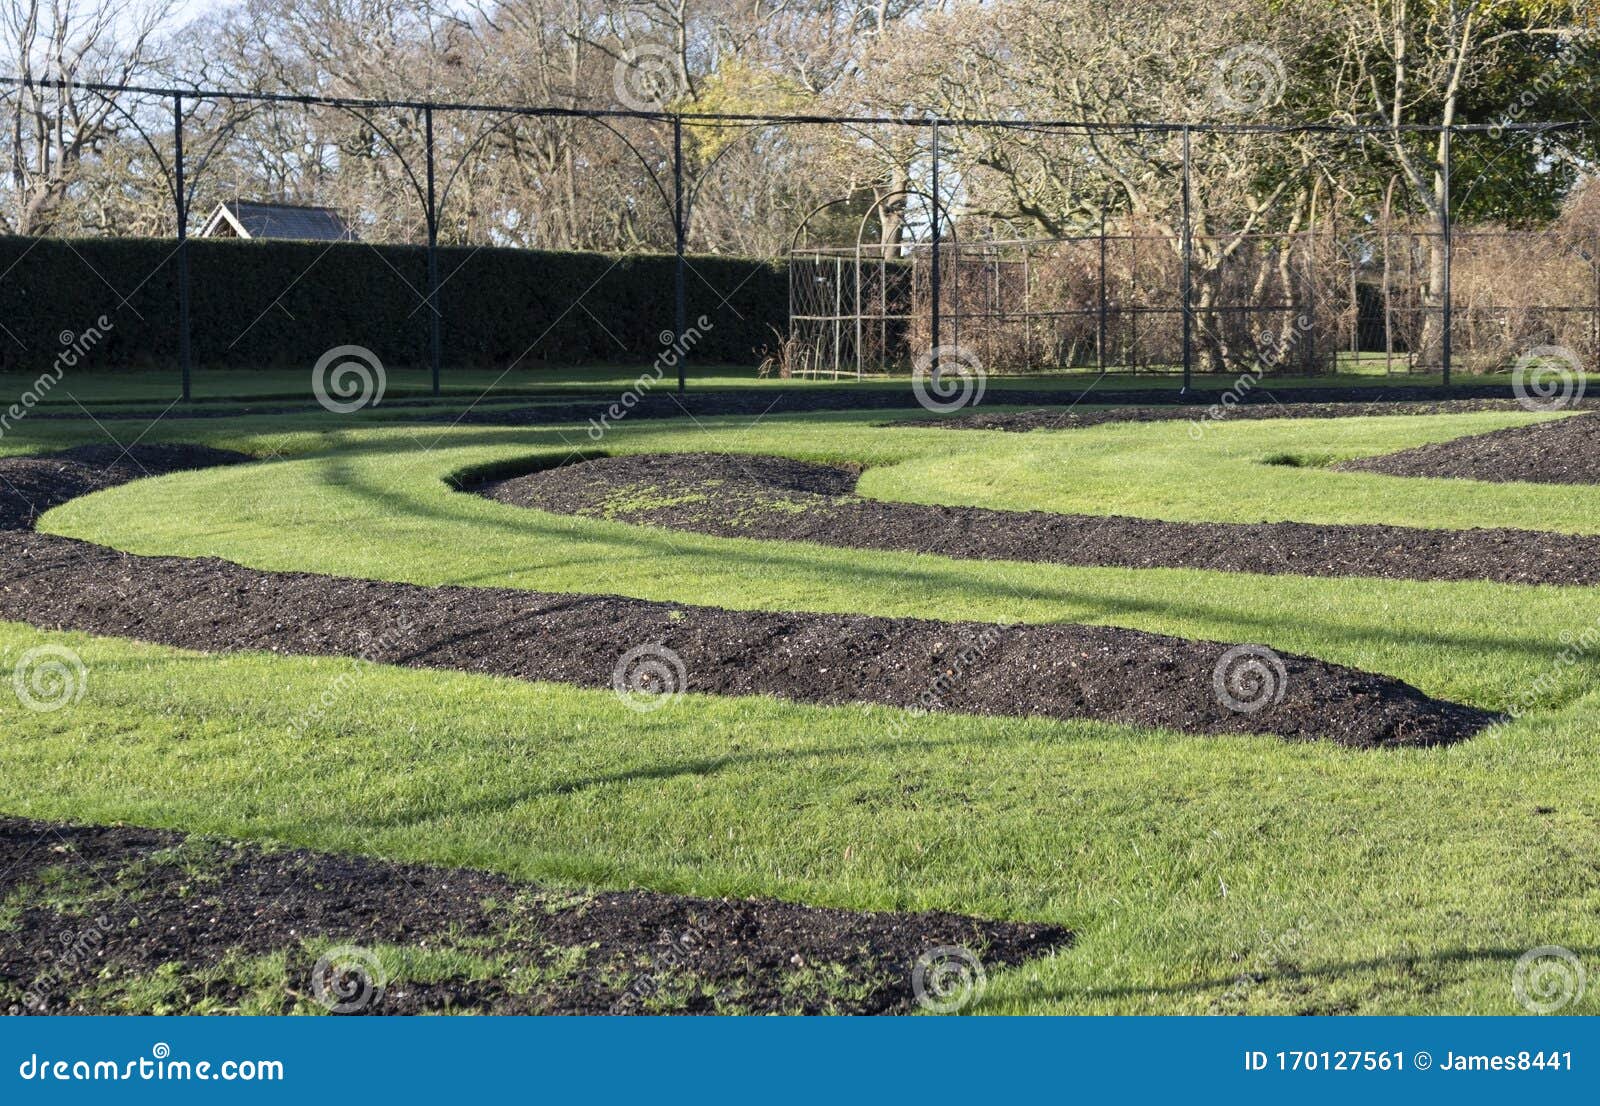 Preparing A Garden Flowerbed For Planting Stock Image Image Of